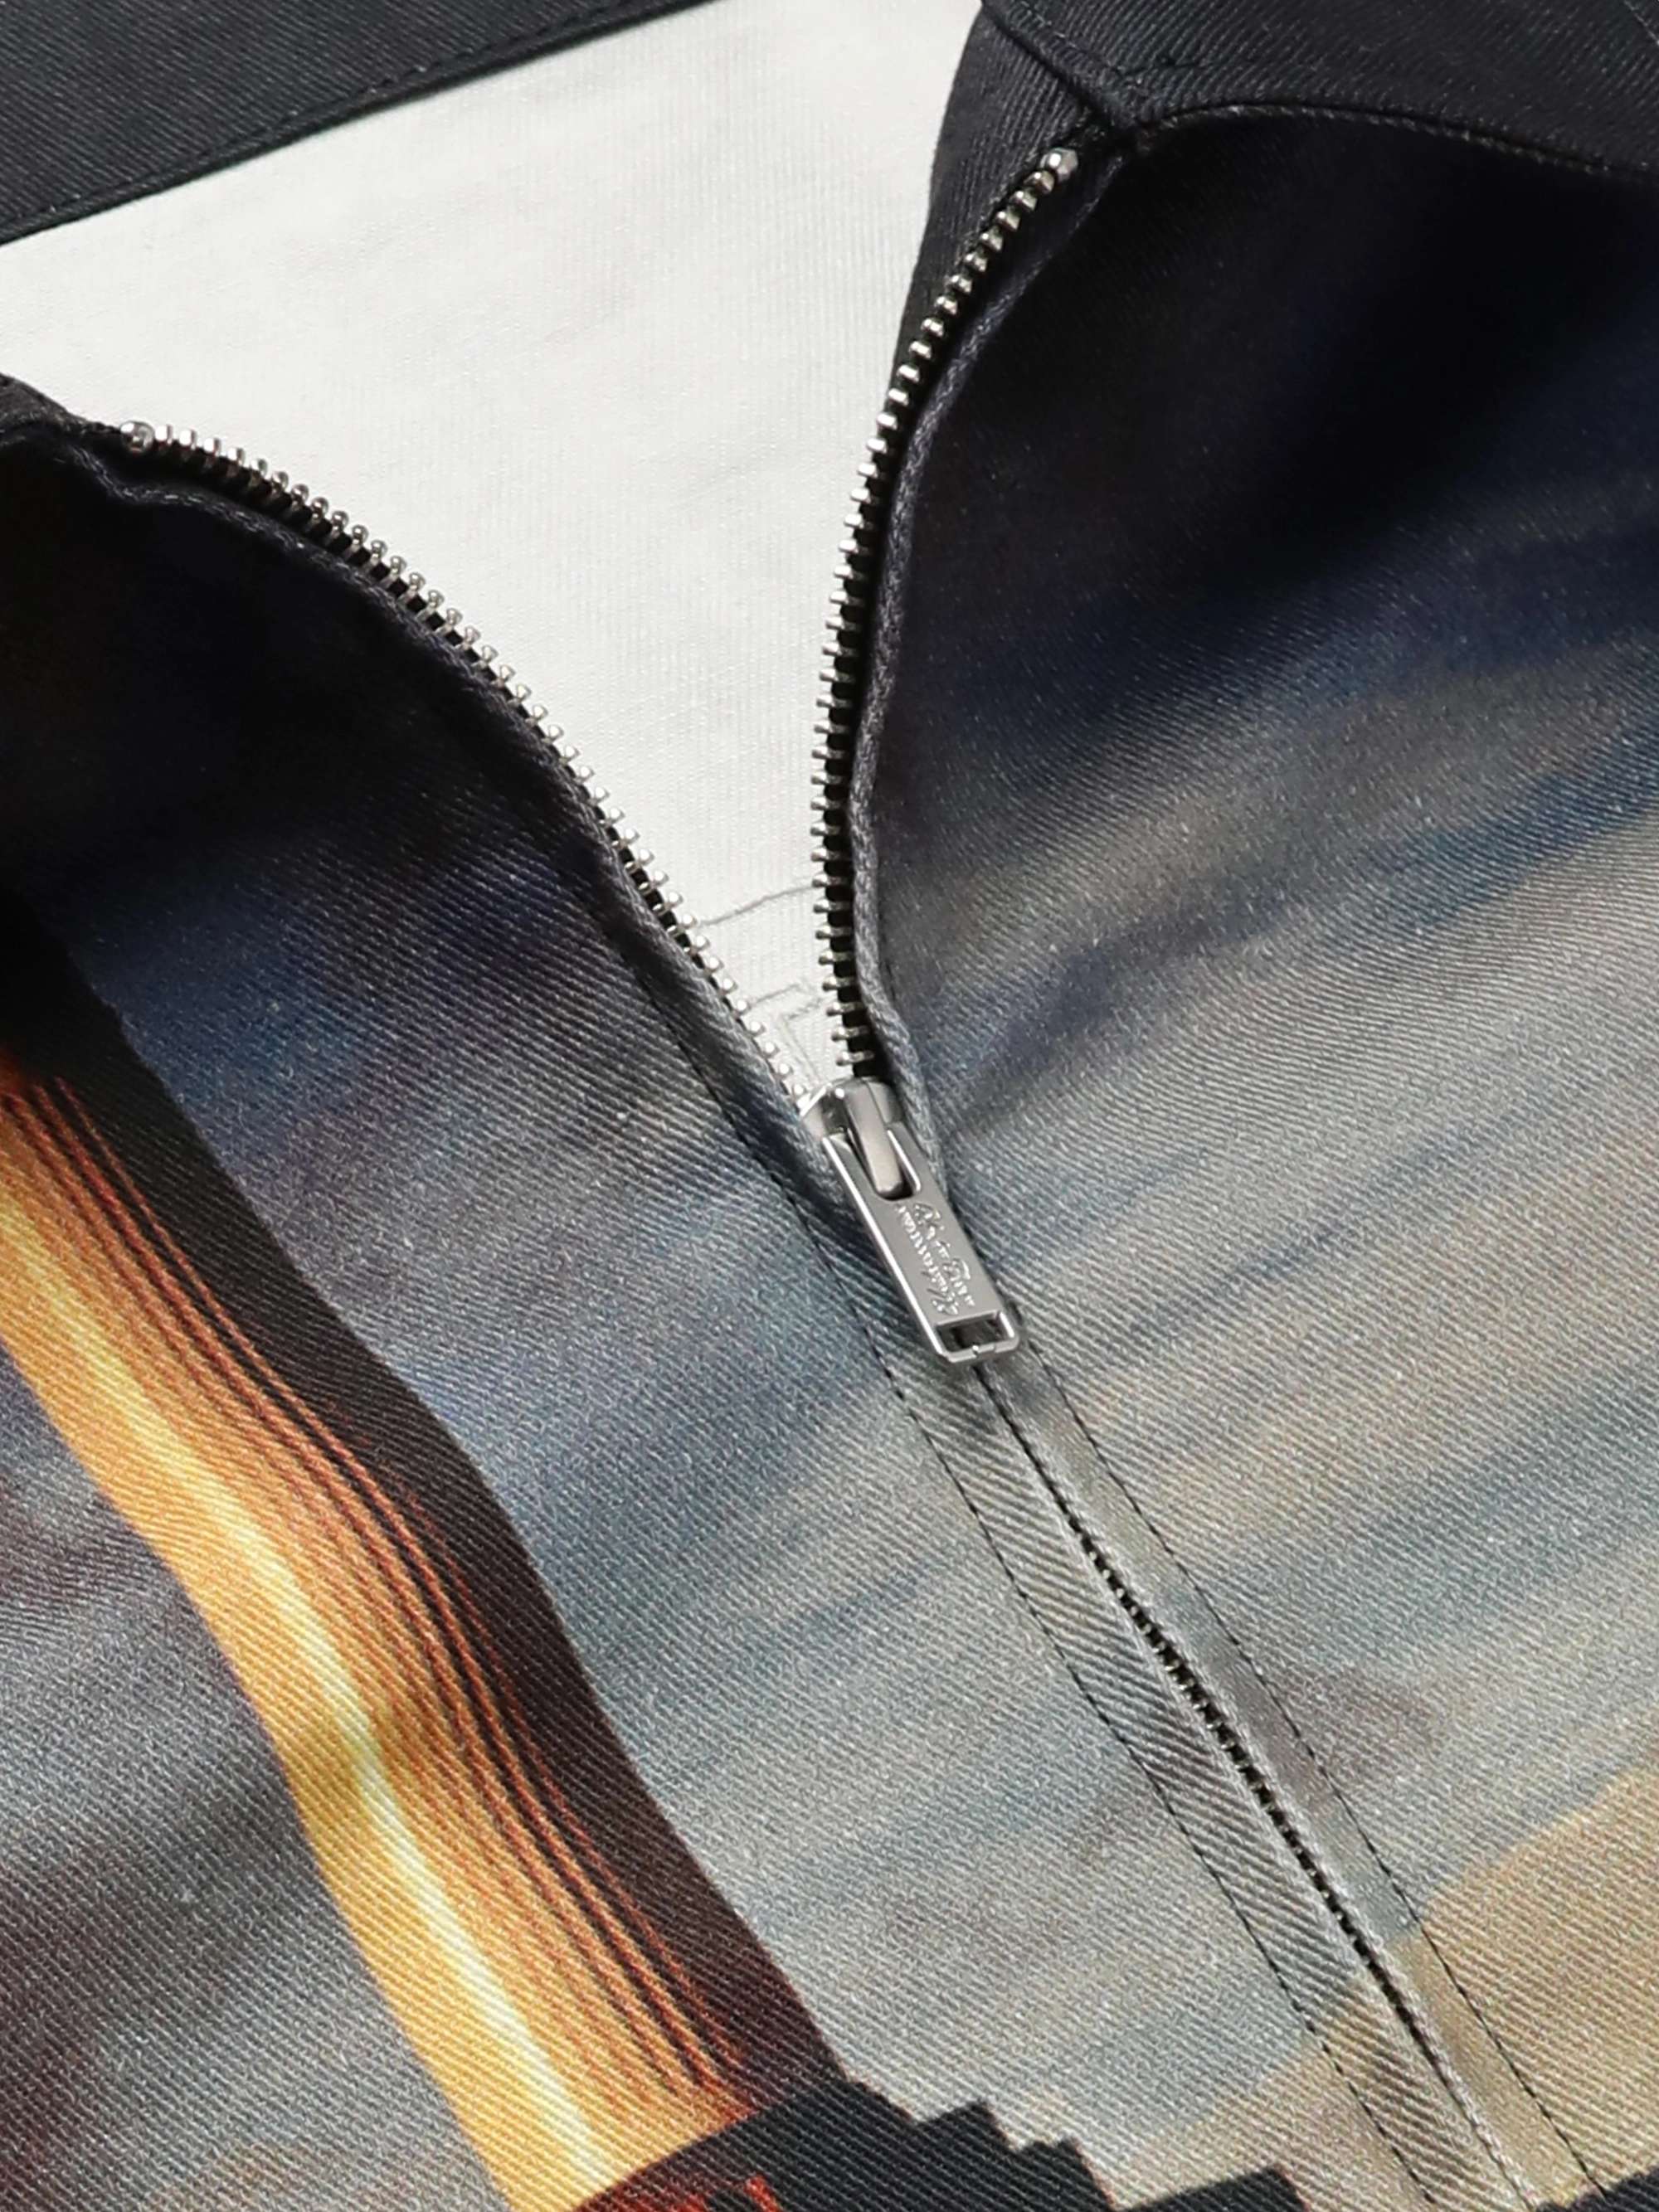 UNDERCOVER + Pink Floyd Printed Cotton-Twill Jacket